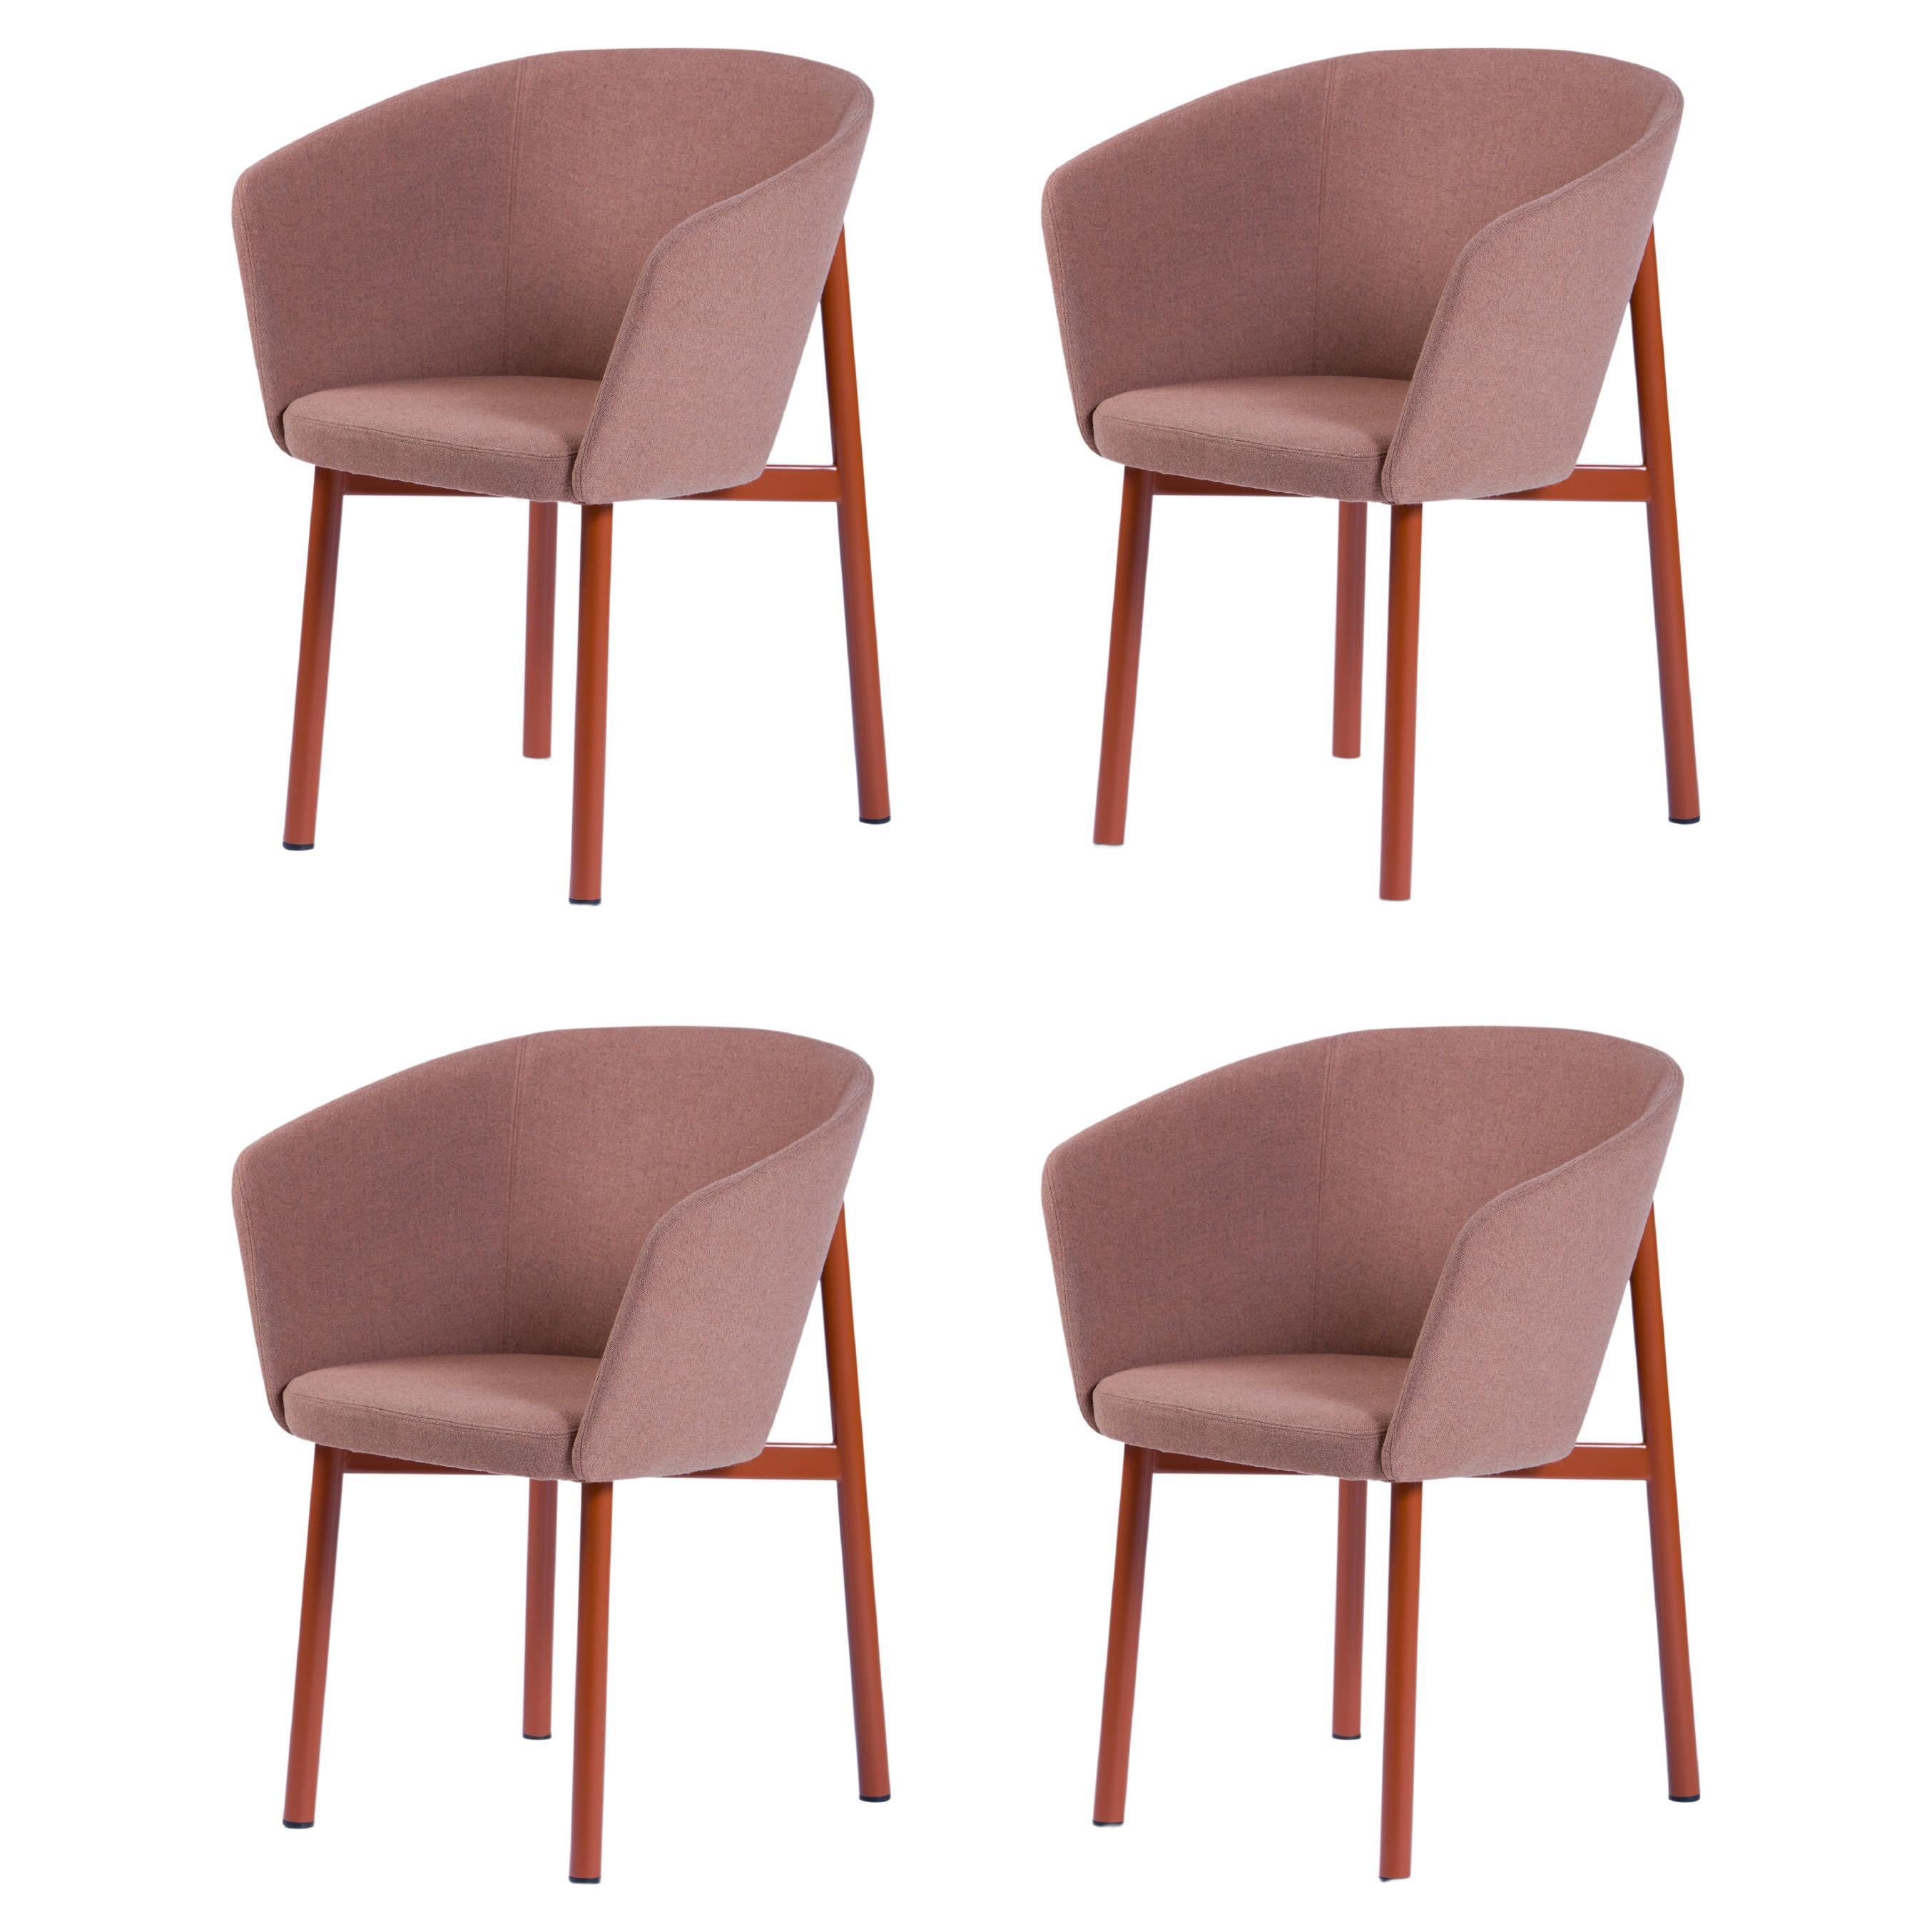 Set of 4 Dusty Pink Residence Bridge Armchair by Kann Design For Sale